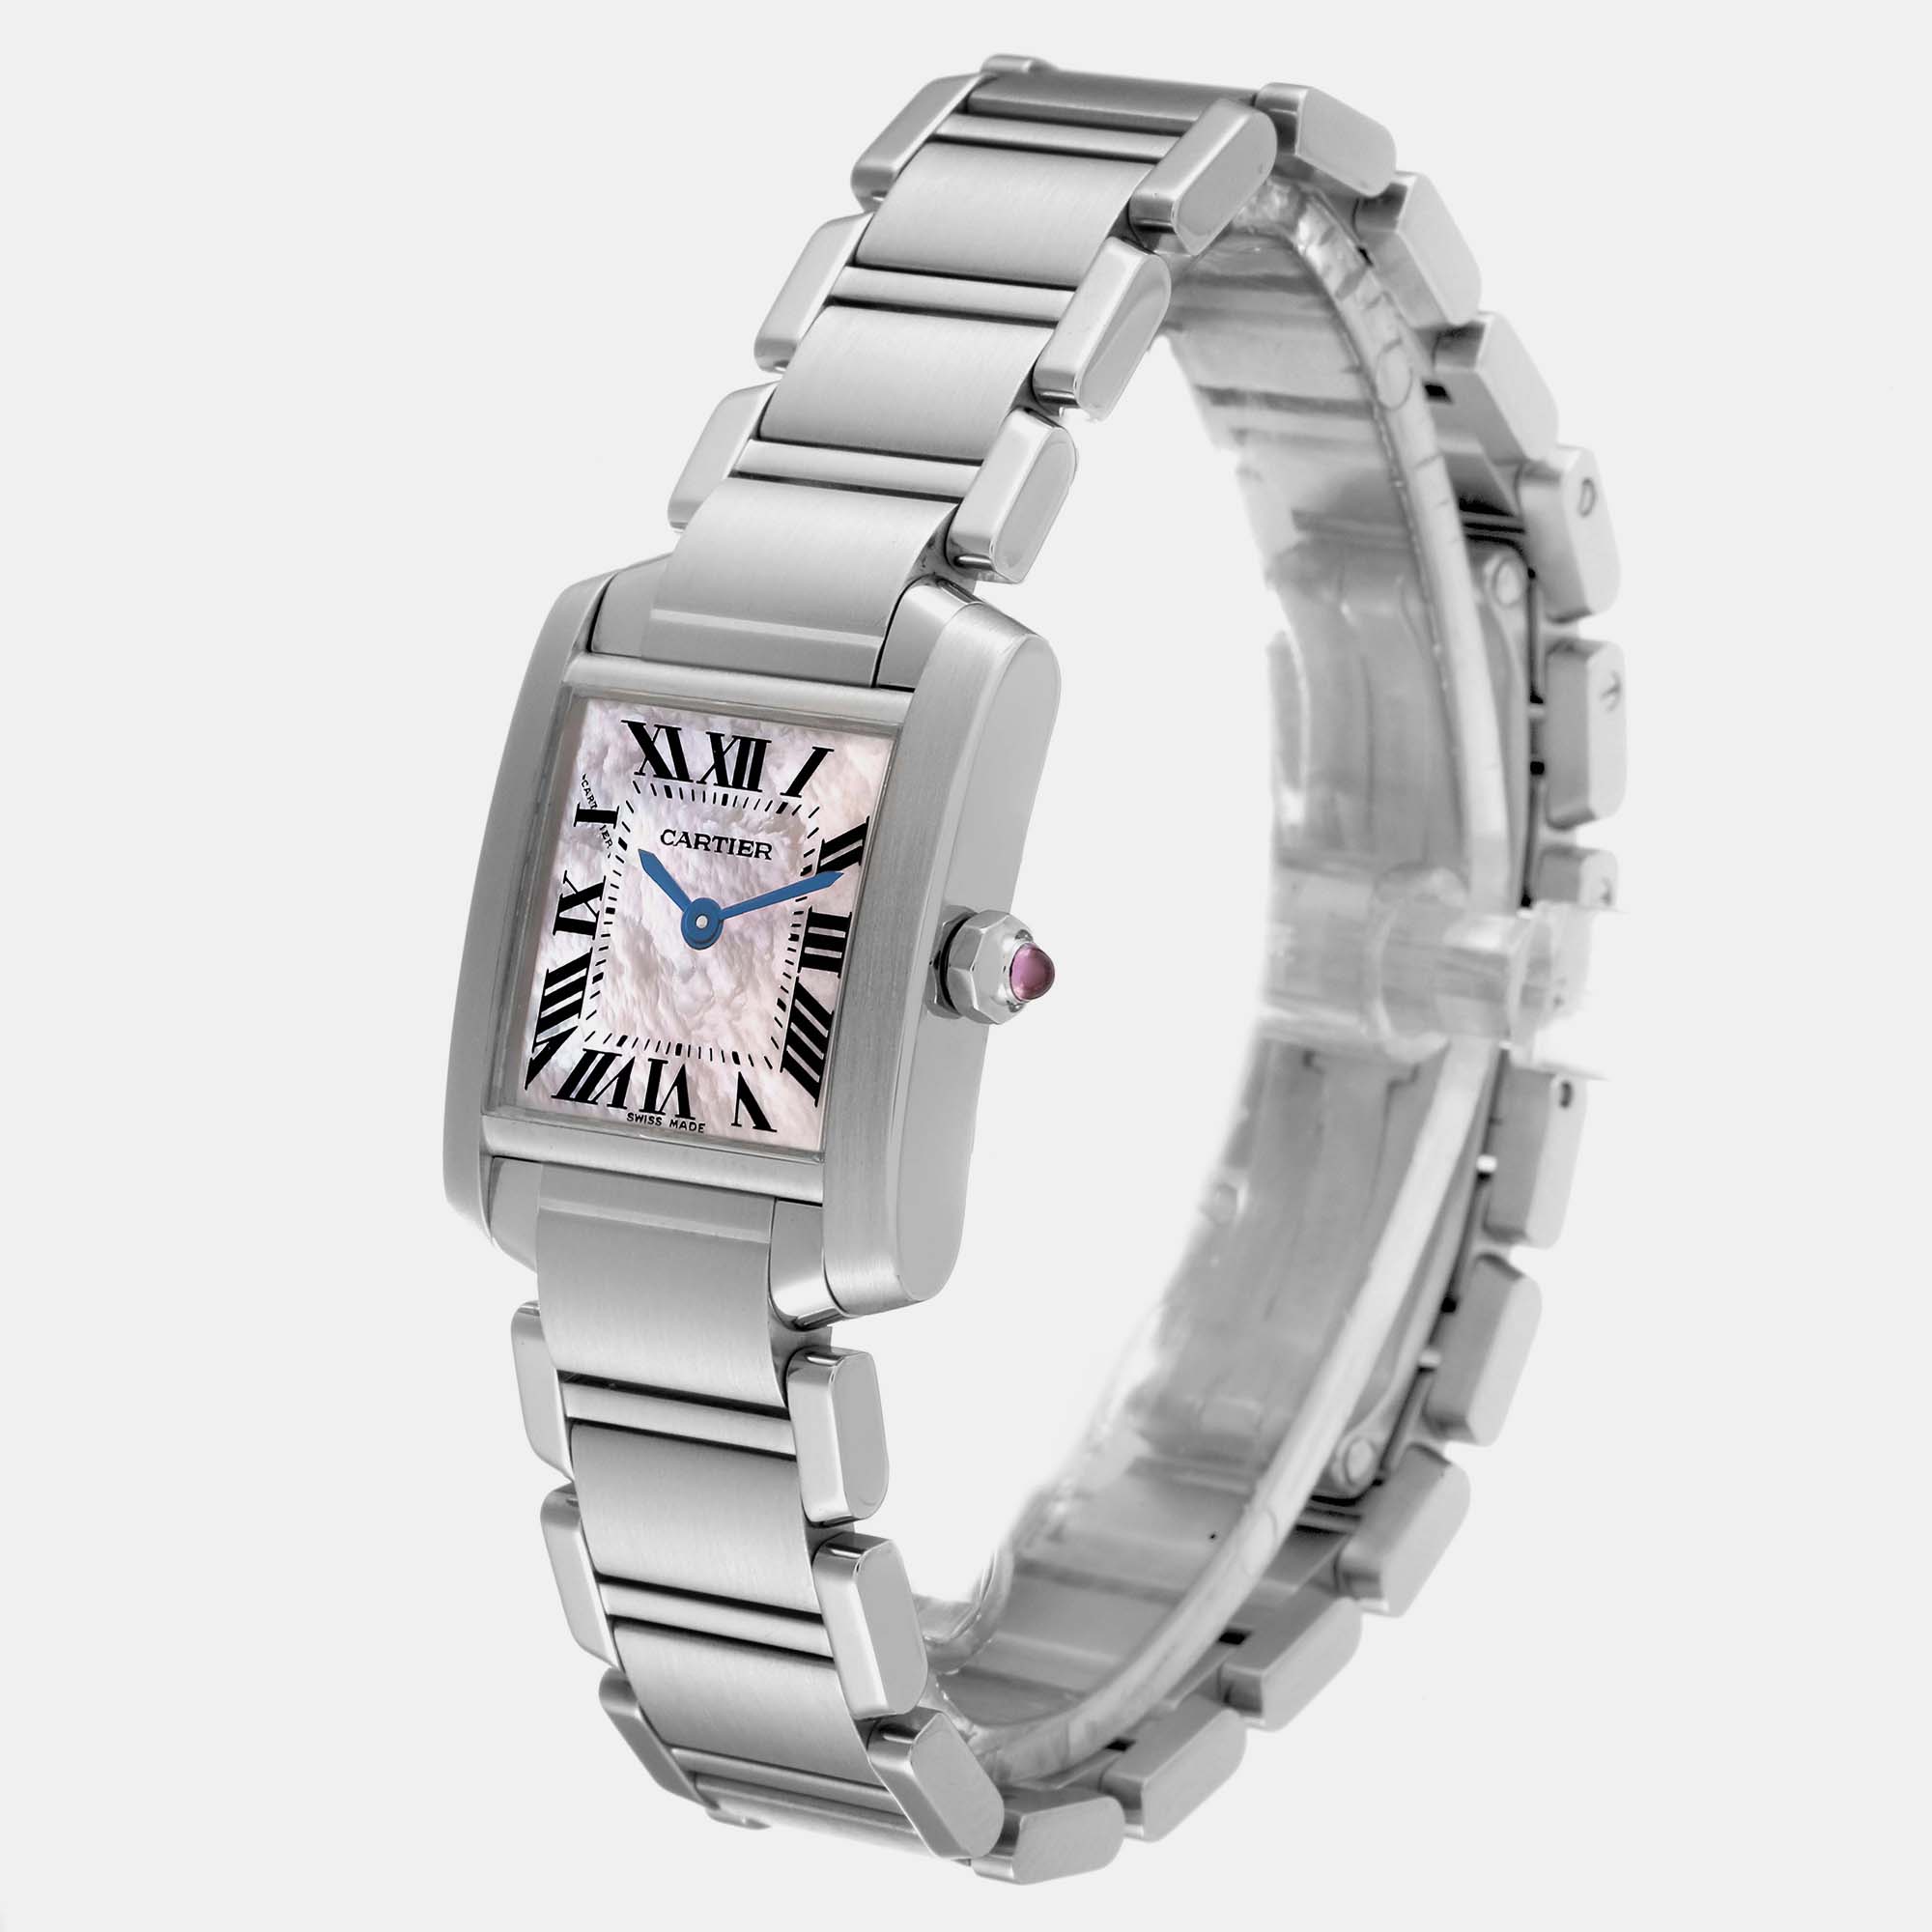 Cartier Tank Francaise Mother Of Pearl Steel Ladies Watch W51028Q3 20.0 Mm X 25.0 Mm